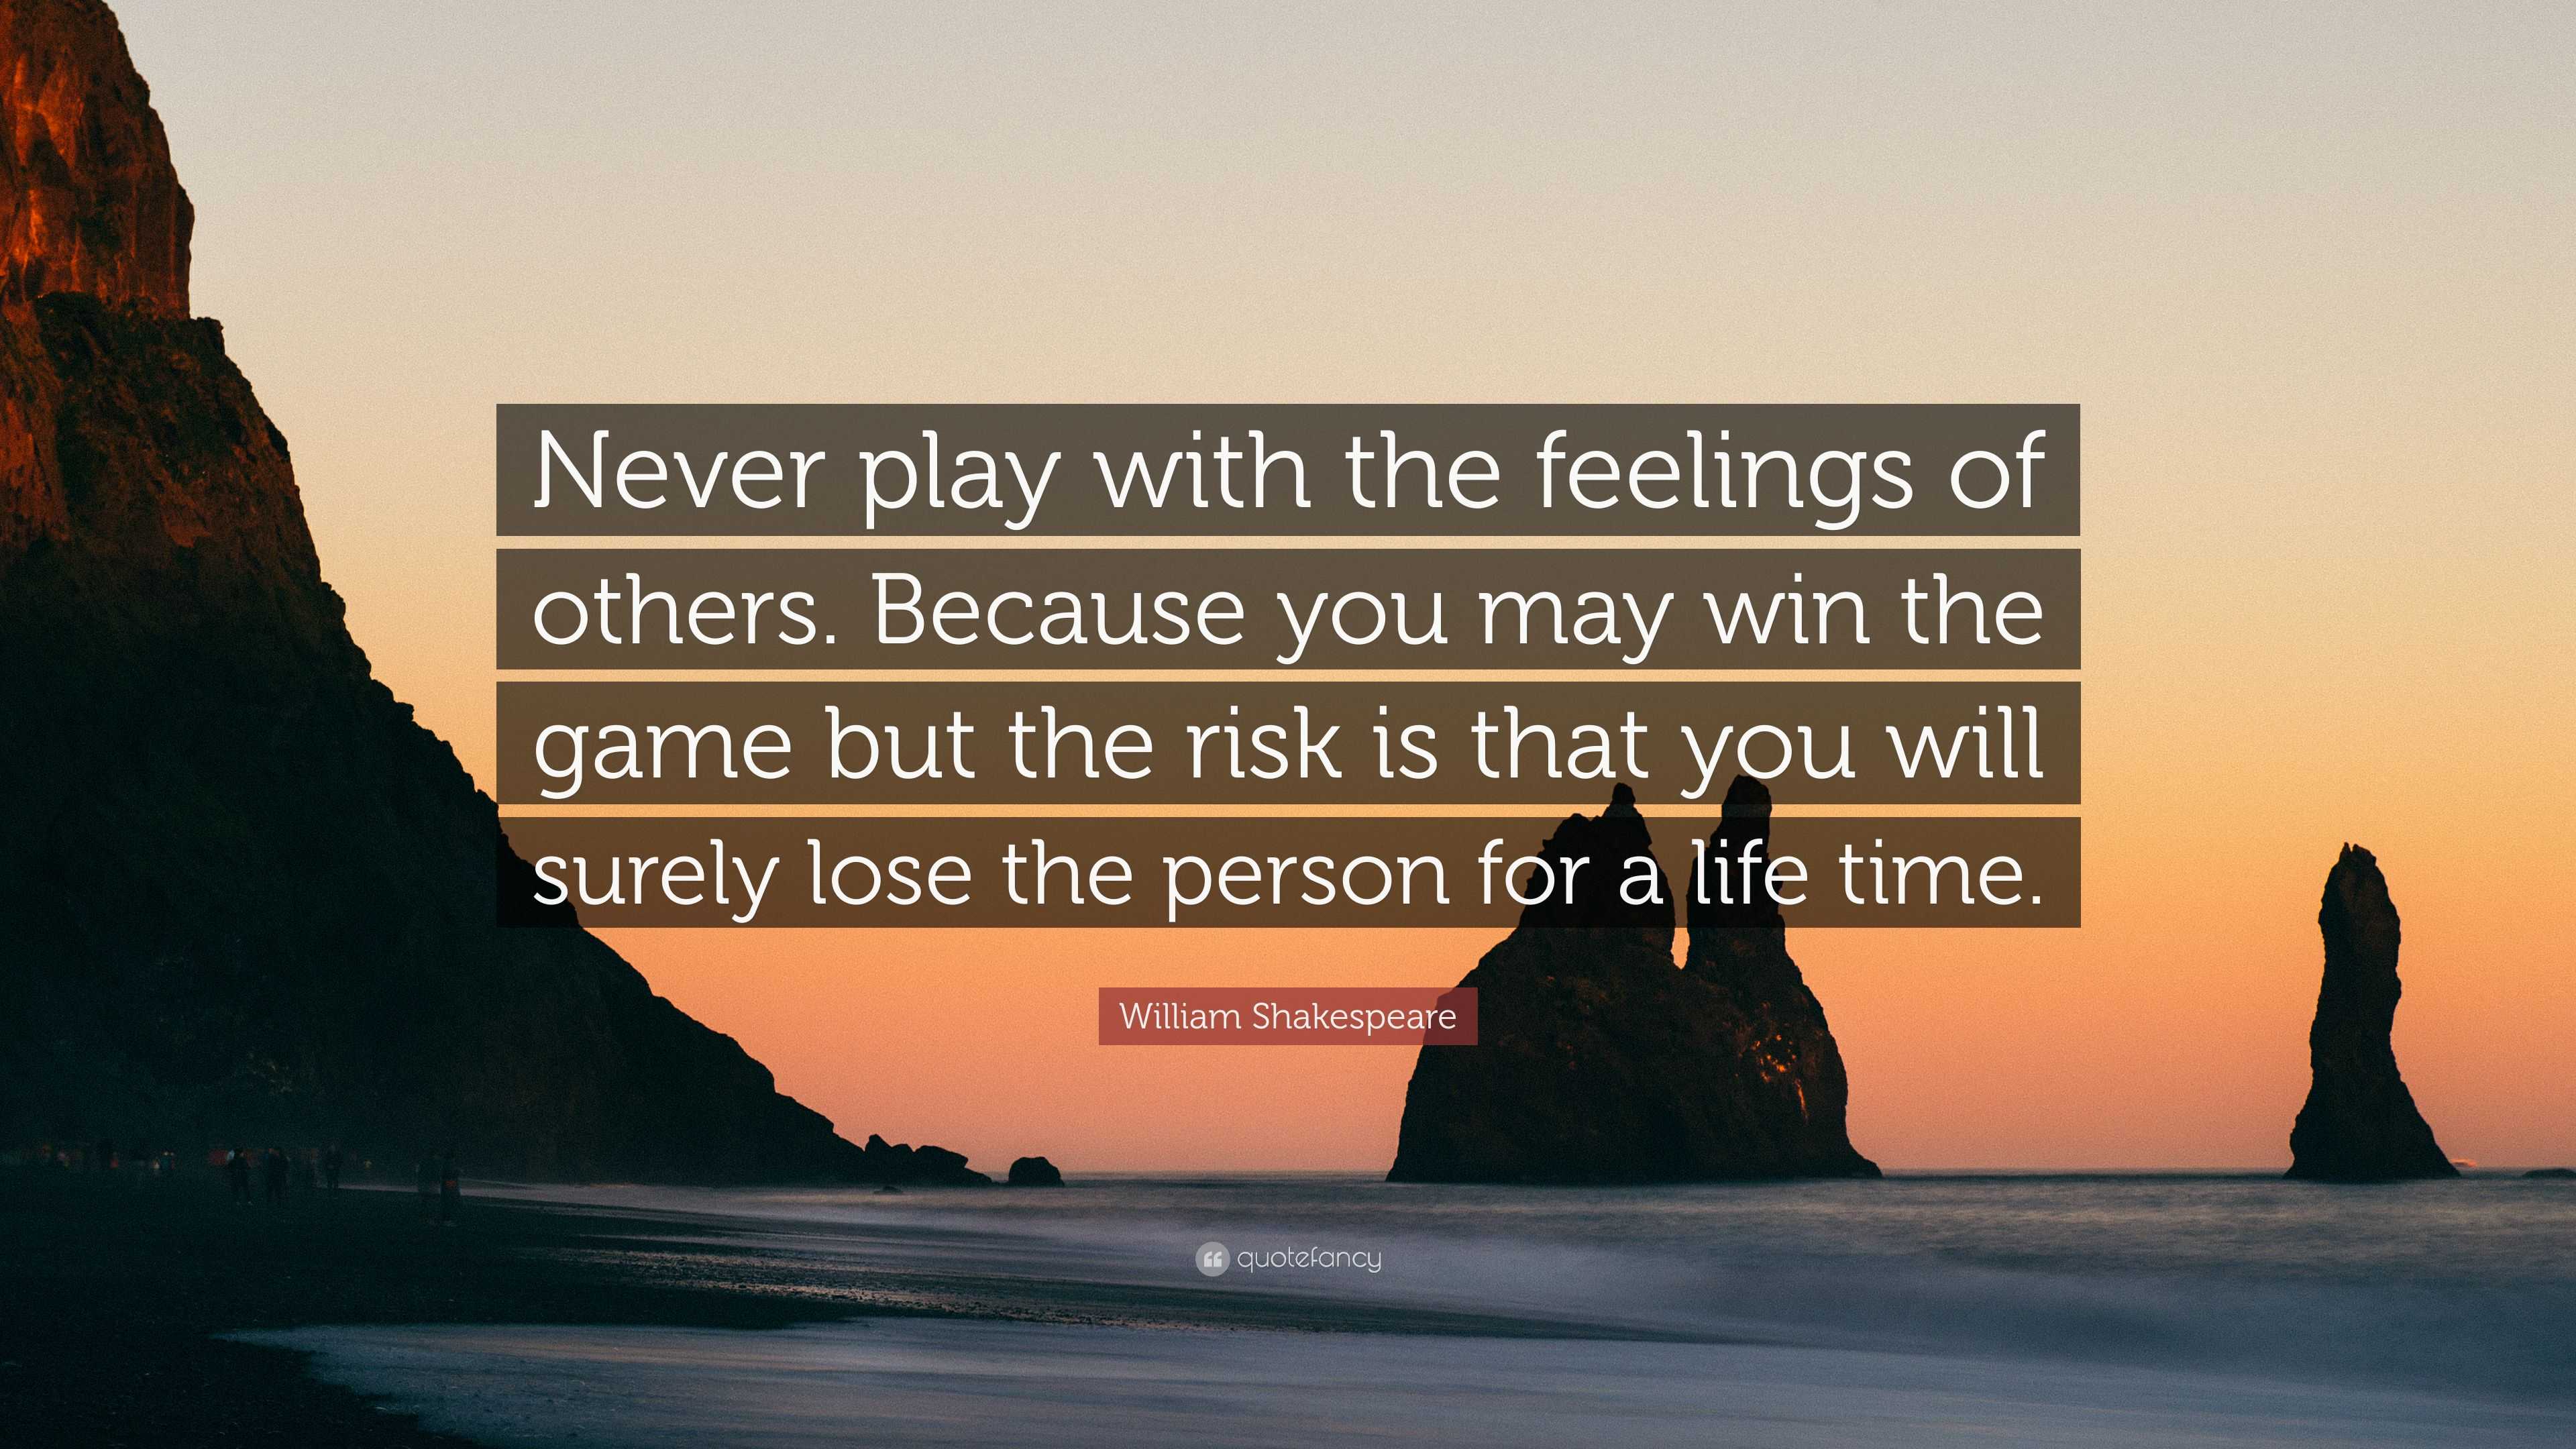 William Shakespeare Quote: “Never Play With The Feelings Of Others. Because You May Win The Game But The Risk Is That You Will Surely Lose The Perso...”